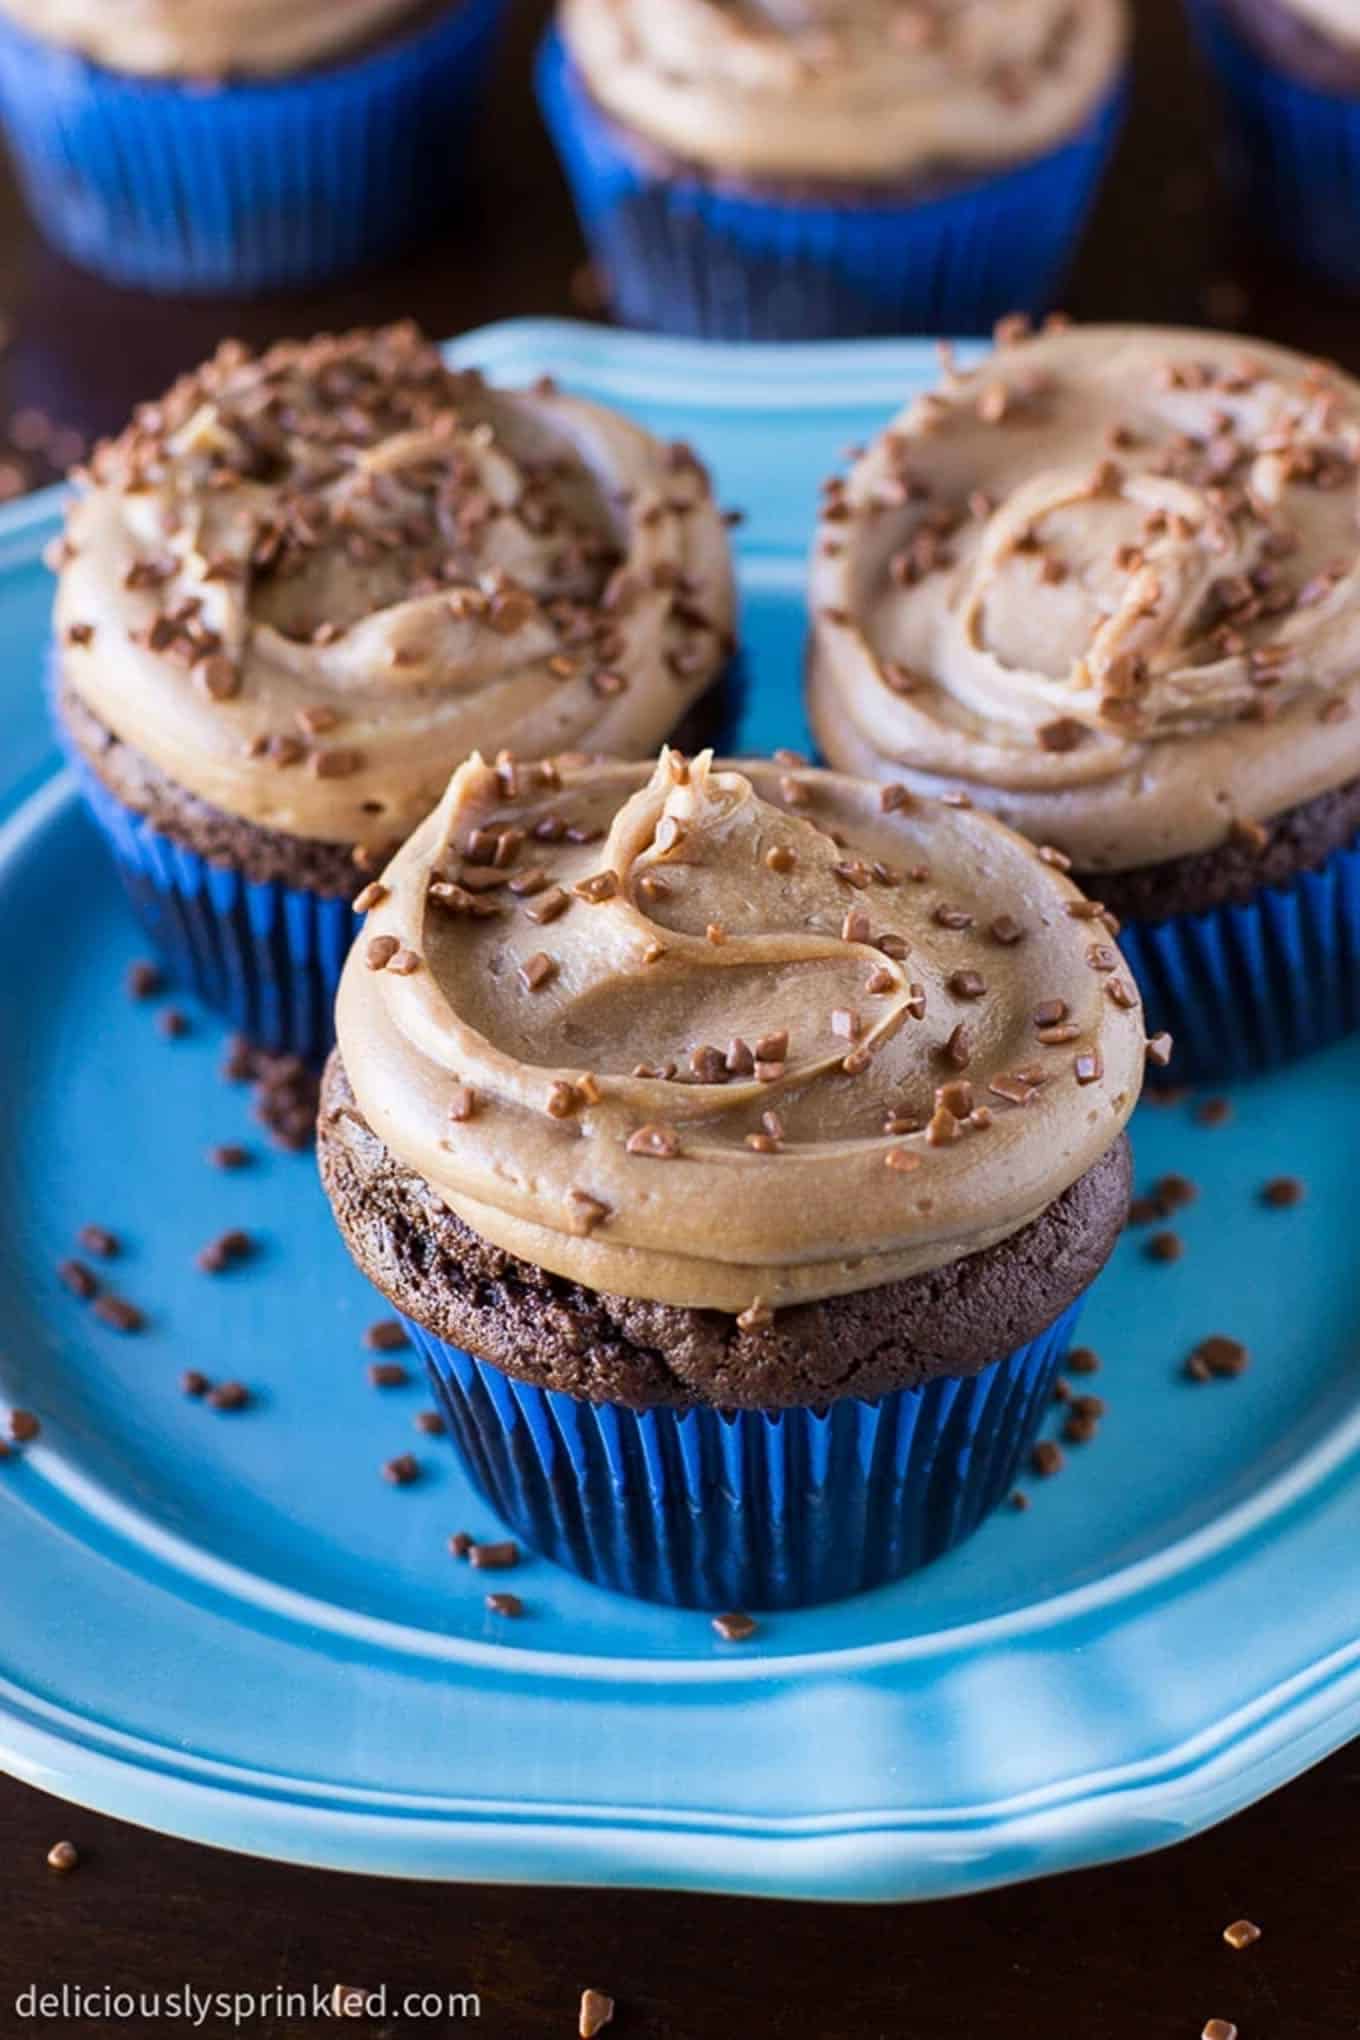 Cupcakes on a plate with chocolate buttercream frosting and bits of chocolate sprinkles on top.